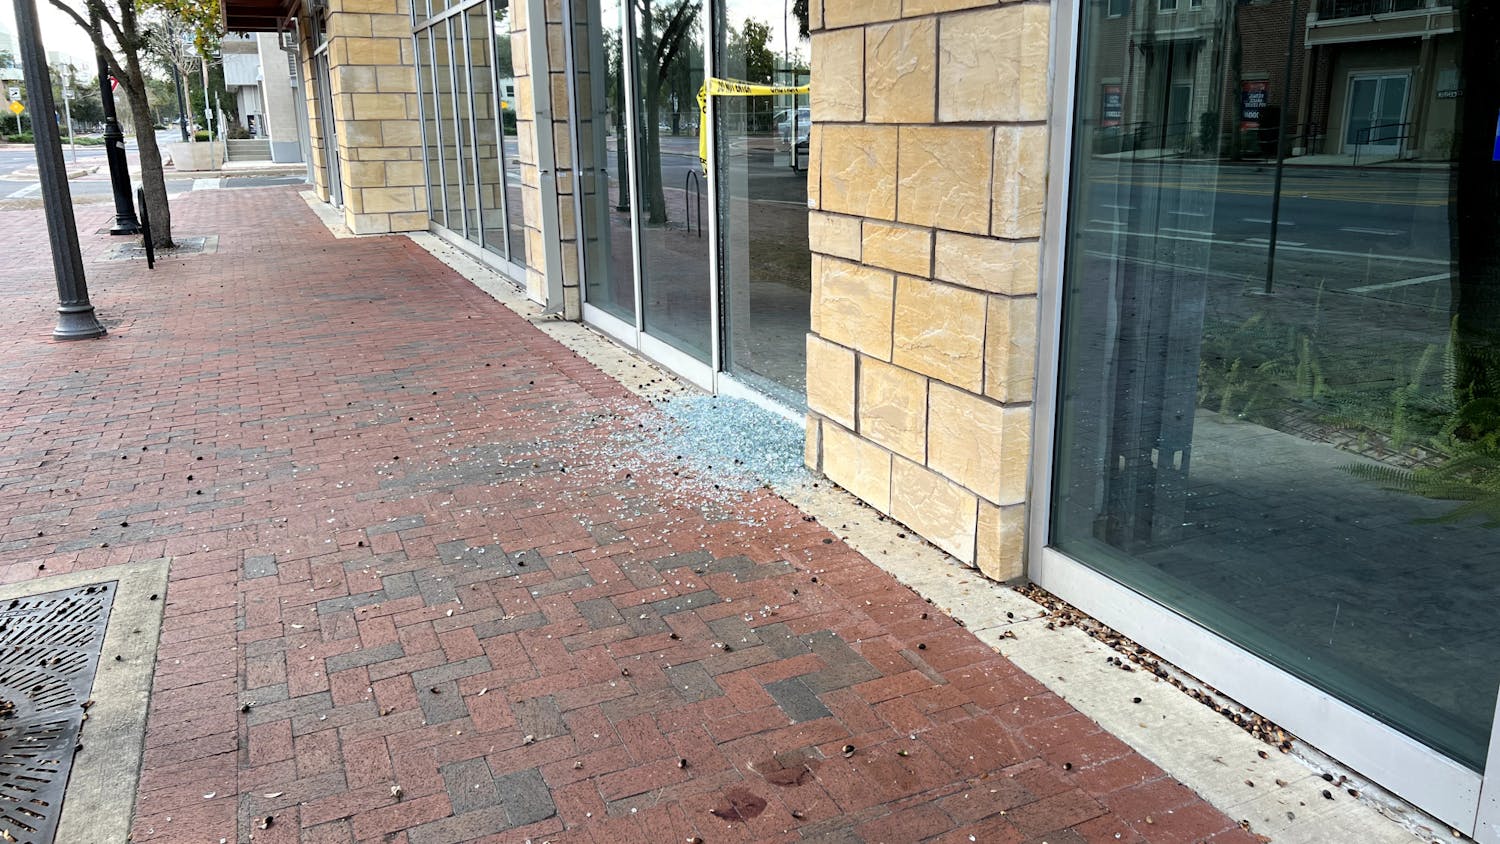 Shattered glass and blood on the sidewalk after Saturday's shooting